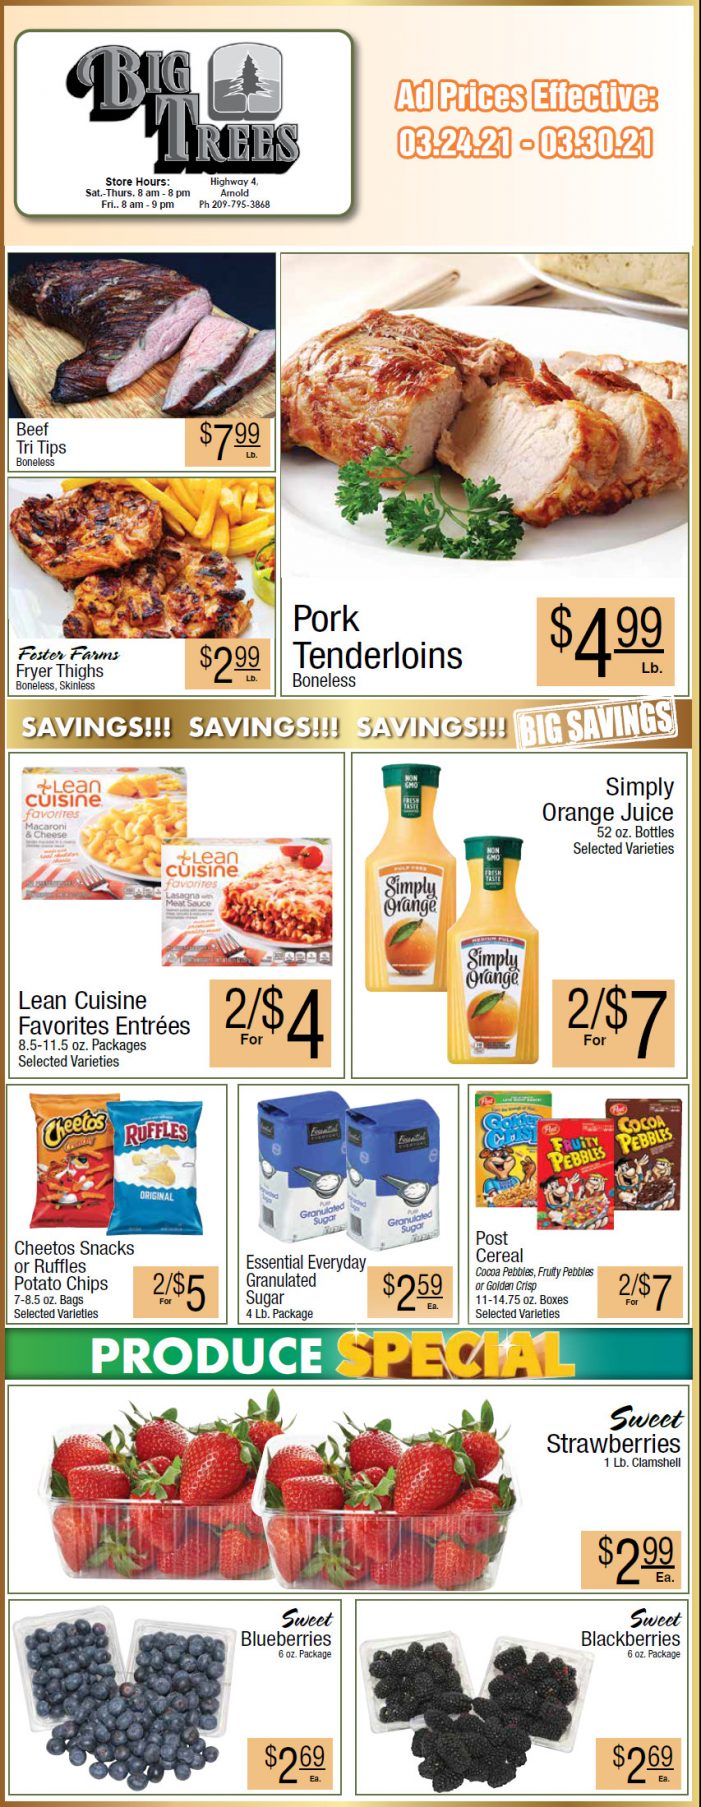 Big Trees Market Weekly Ad & Grocery Specials Through March 30th